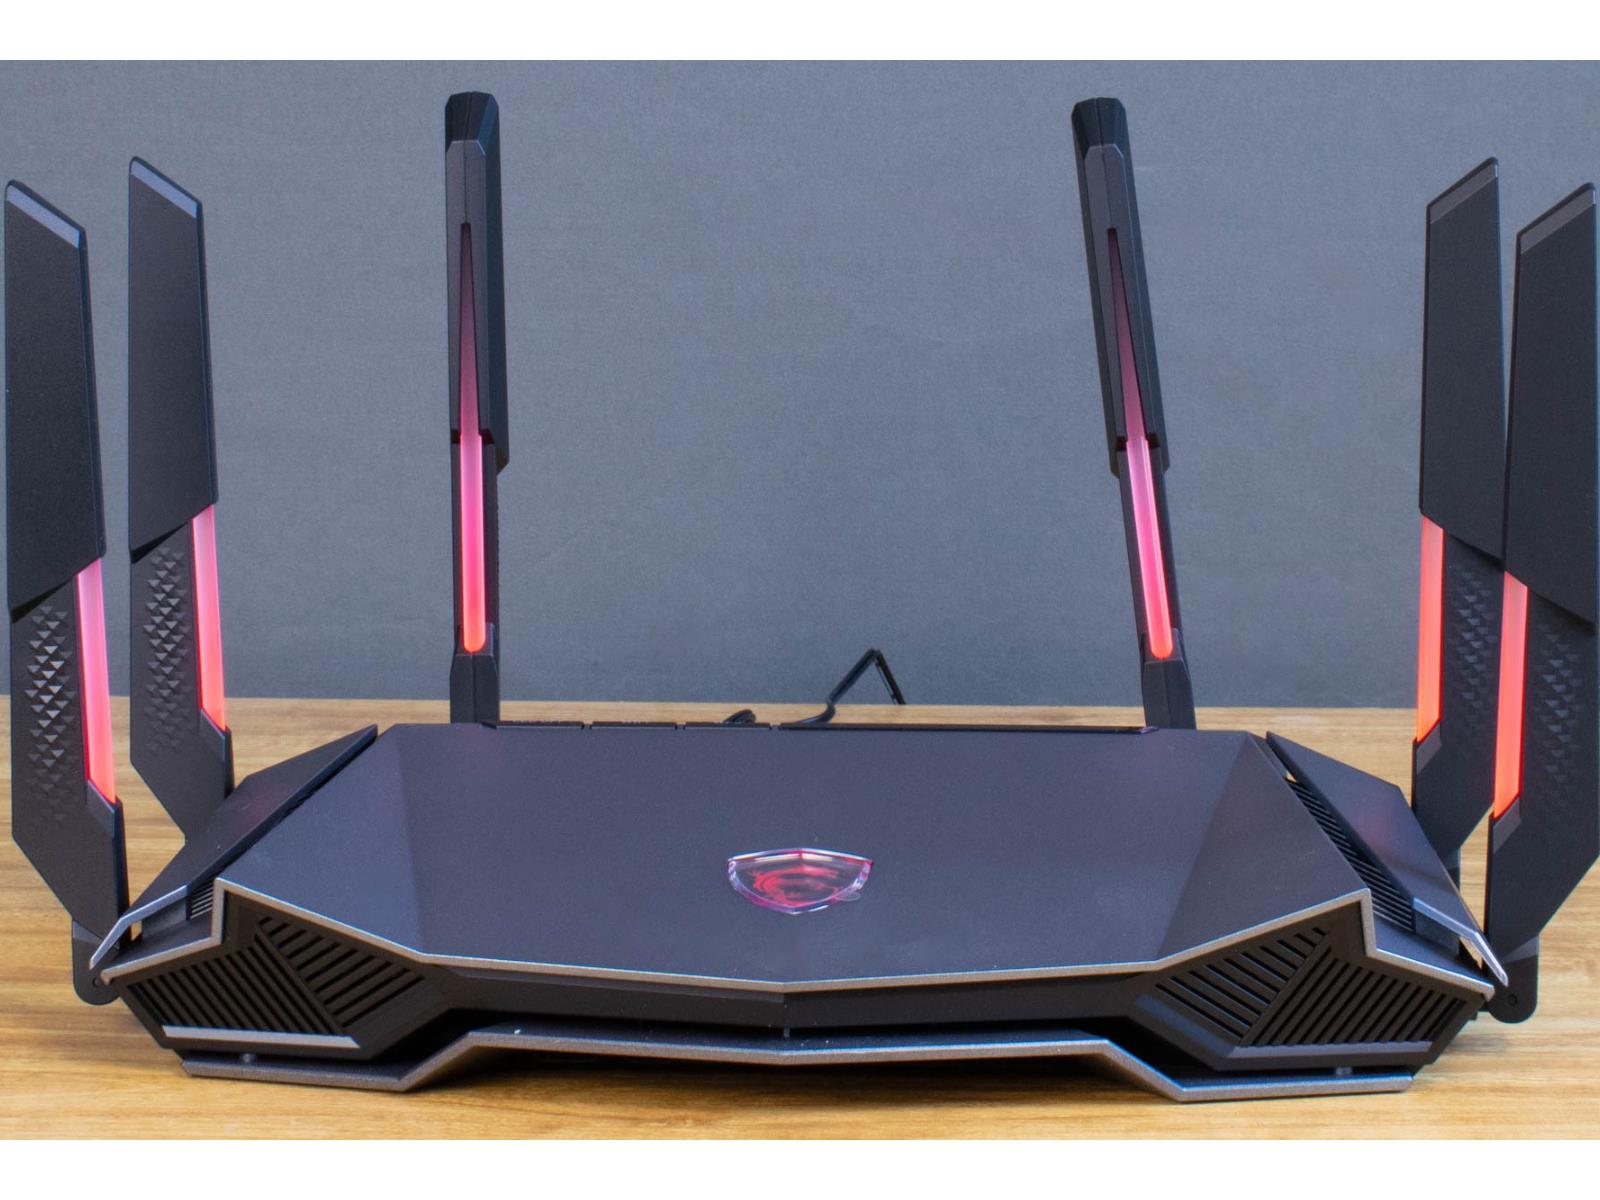 MSI RadiX AX6600 and AXE6600 Wi-Fi Tri-Band Routers & AX1800 Wi-Fi USB  Adapter Review: What You Should Know Before You Buy